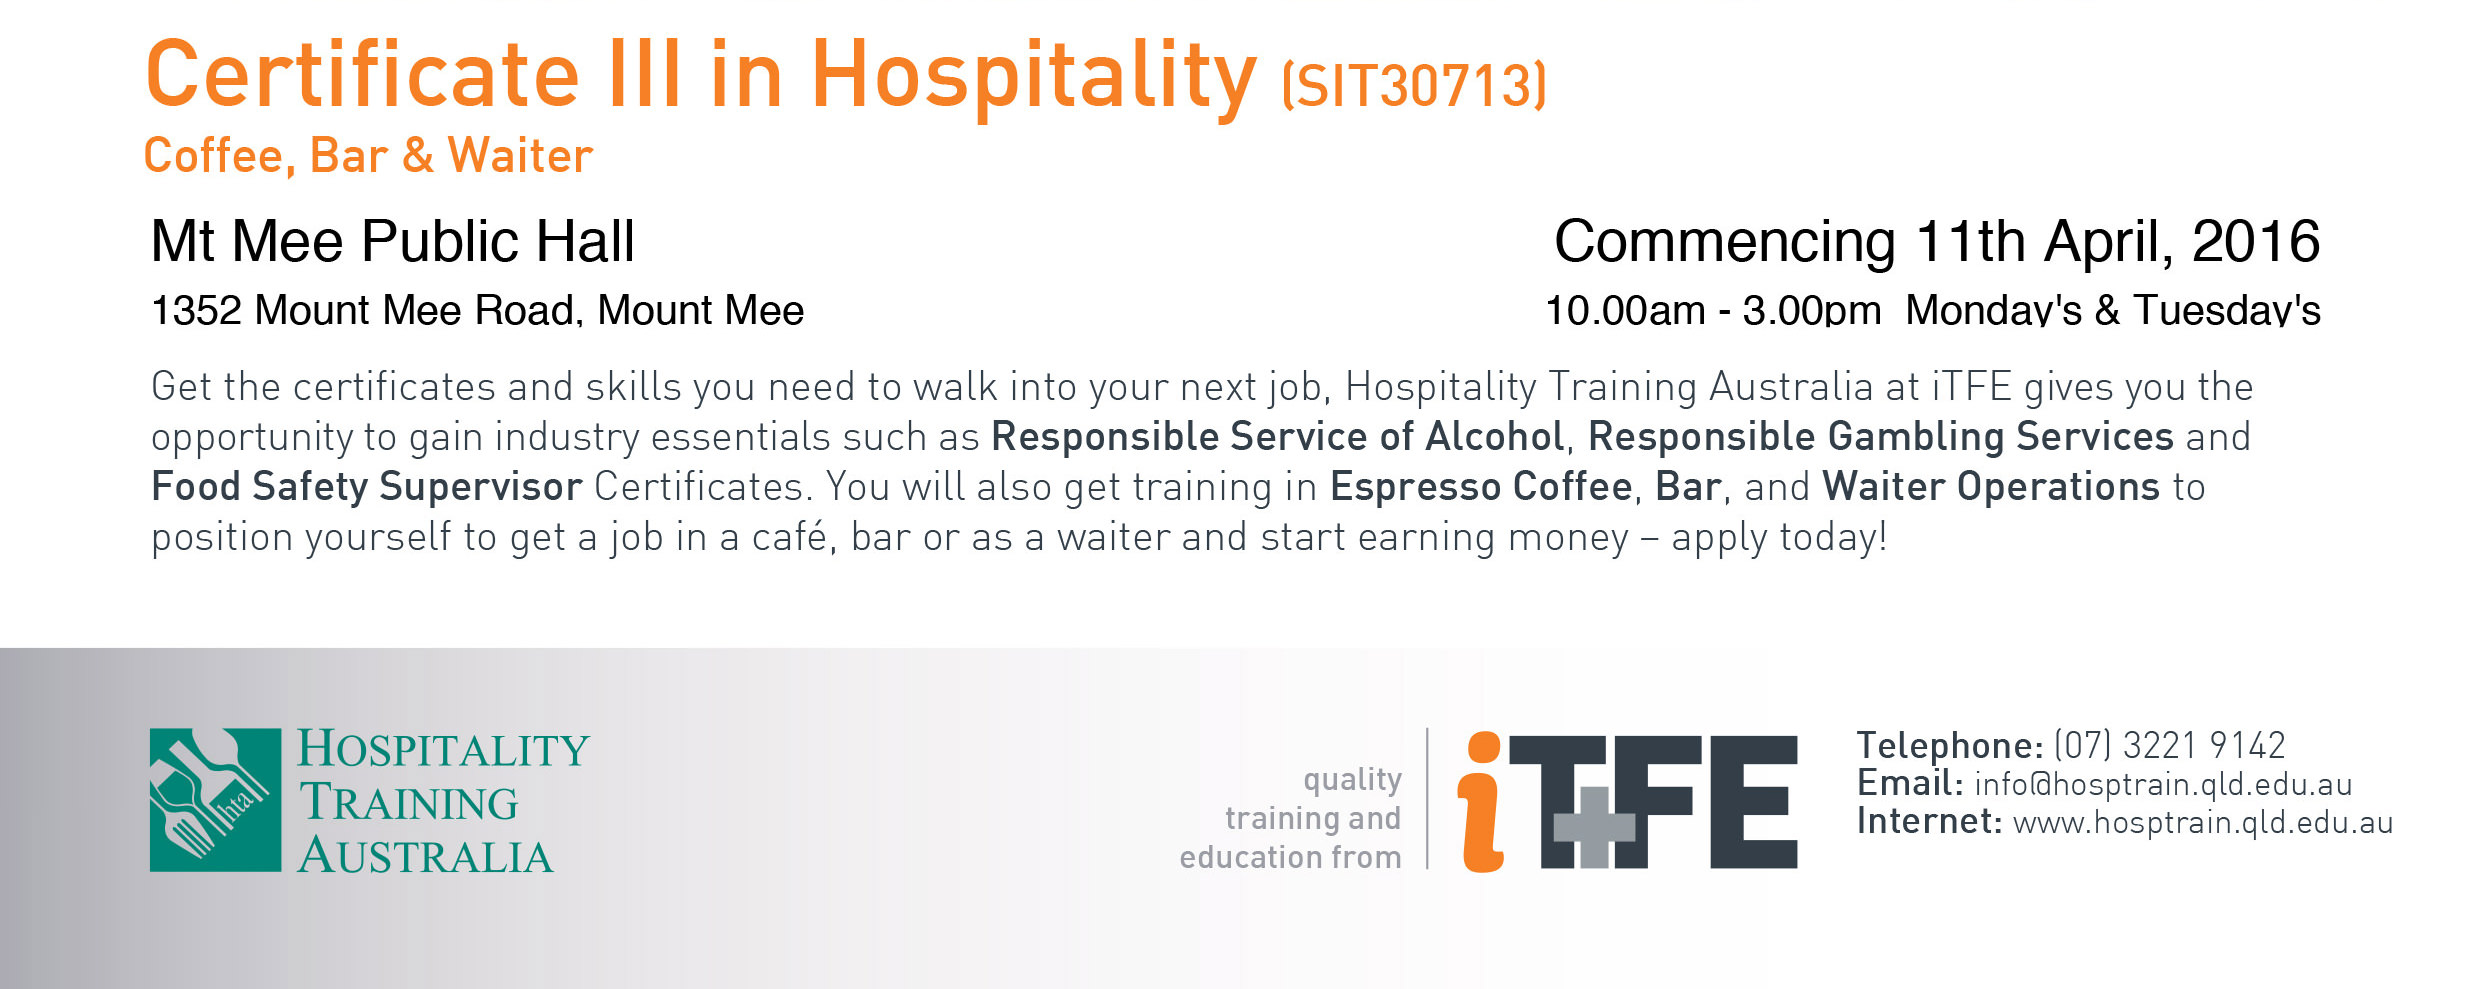 mountmee.com.au – Certificate 3 in Hospitality at Mount Mee Hall 